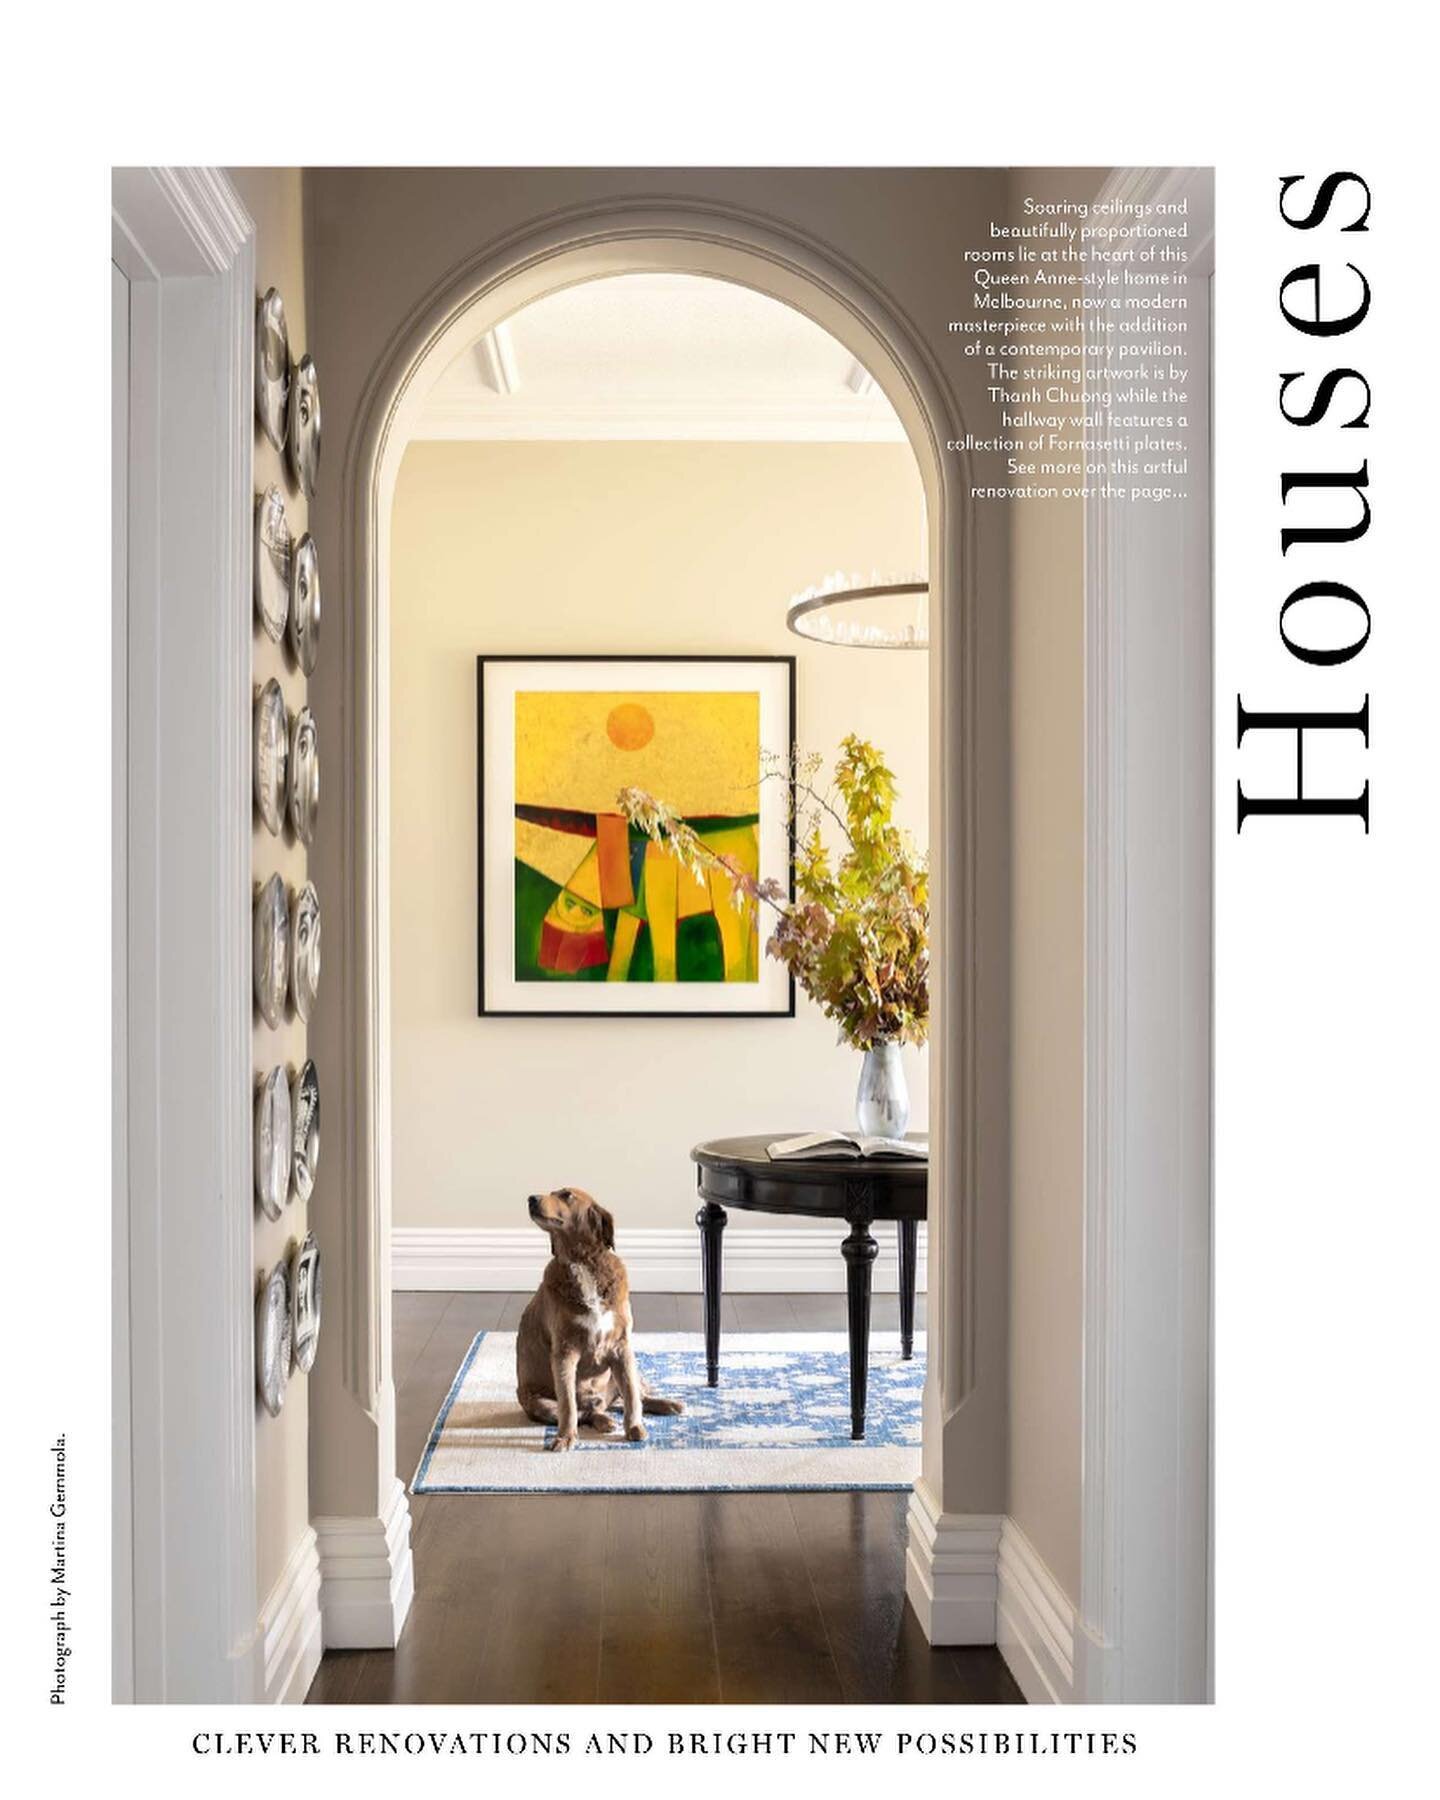 Eaglemont feature in House &amp; Garden featuring furnishings &amp; decorative lighting by AND. What a dream home! 

Architect: @darrencarnellarchitects 
Builder: @scottbrosdesignconstruction 
Landscaping: @melbournegardenscapes 
Photo shoot styling: